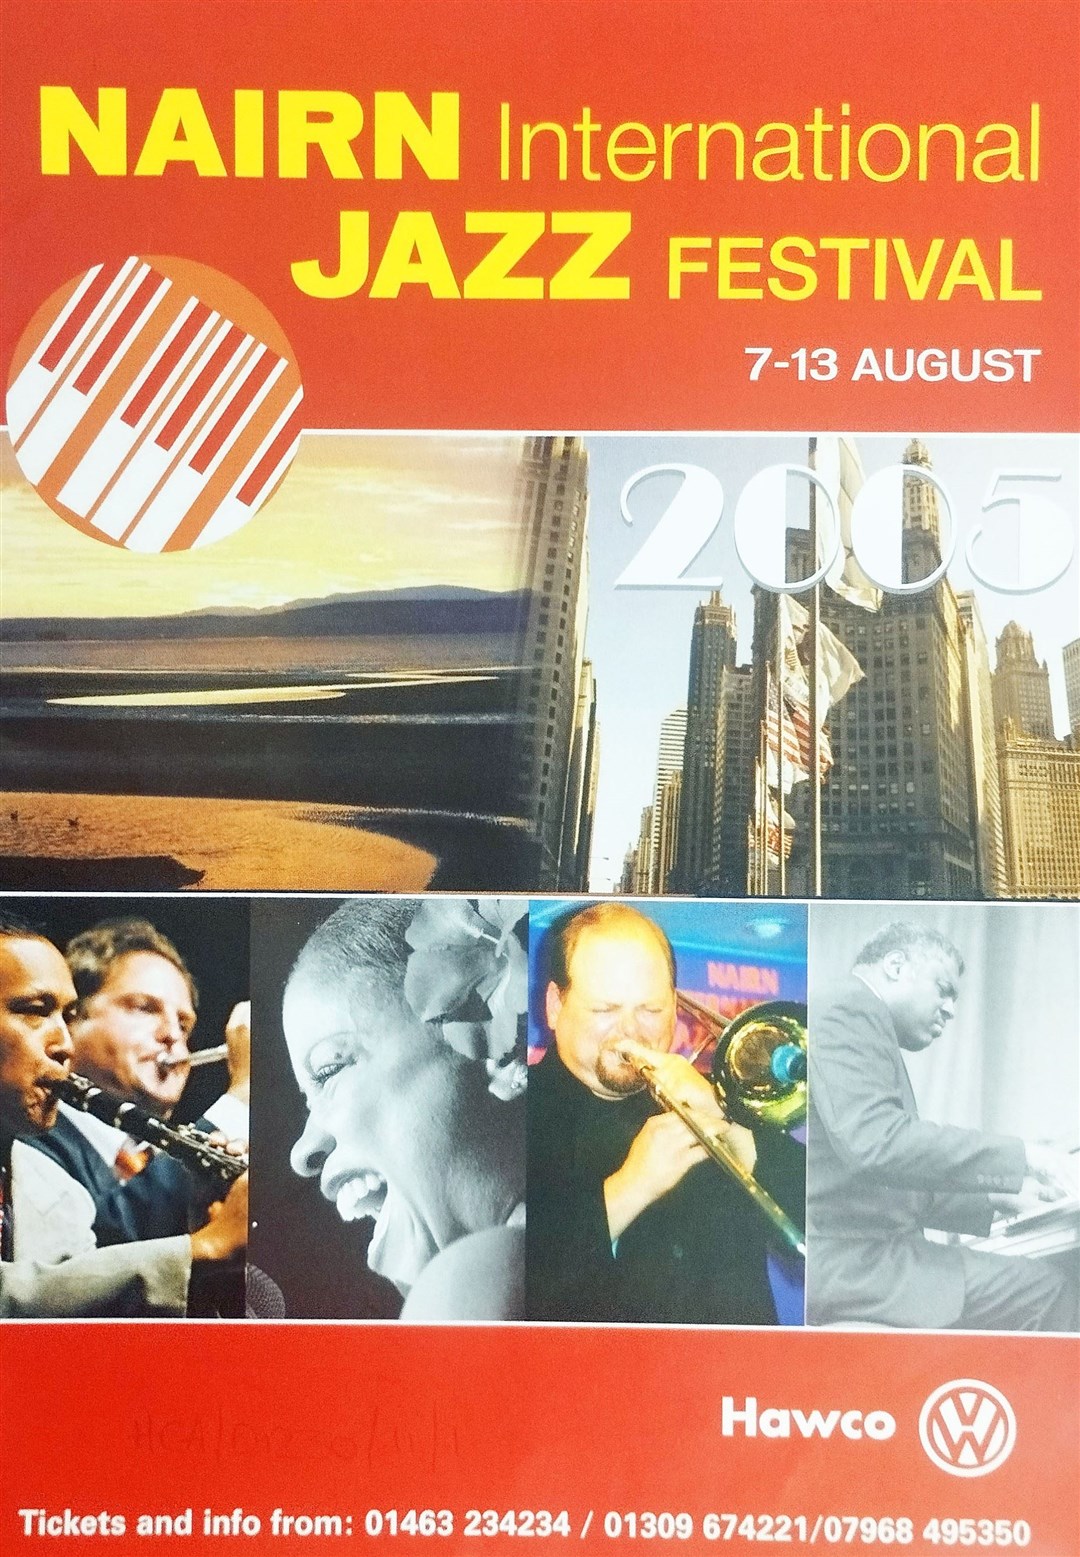 The front cover of a Nairn Jazz festival programme.